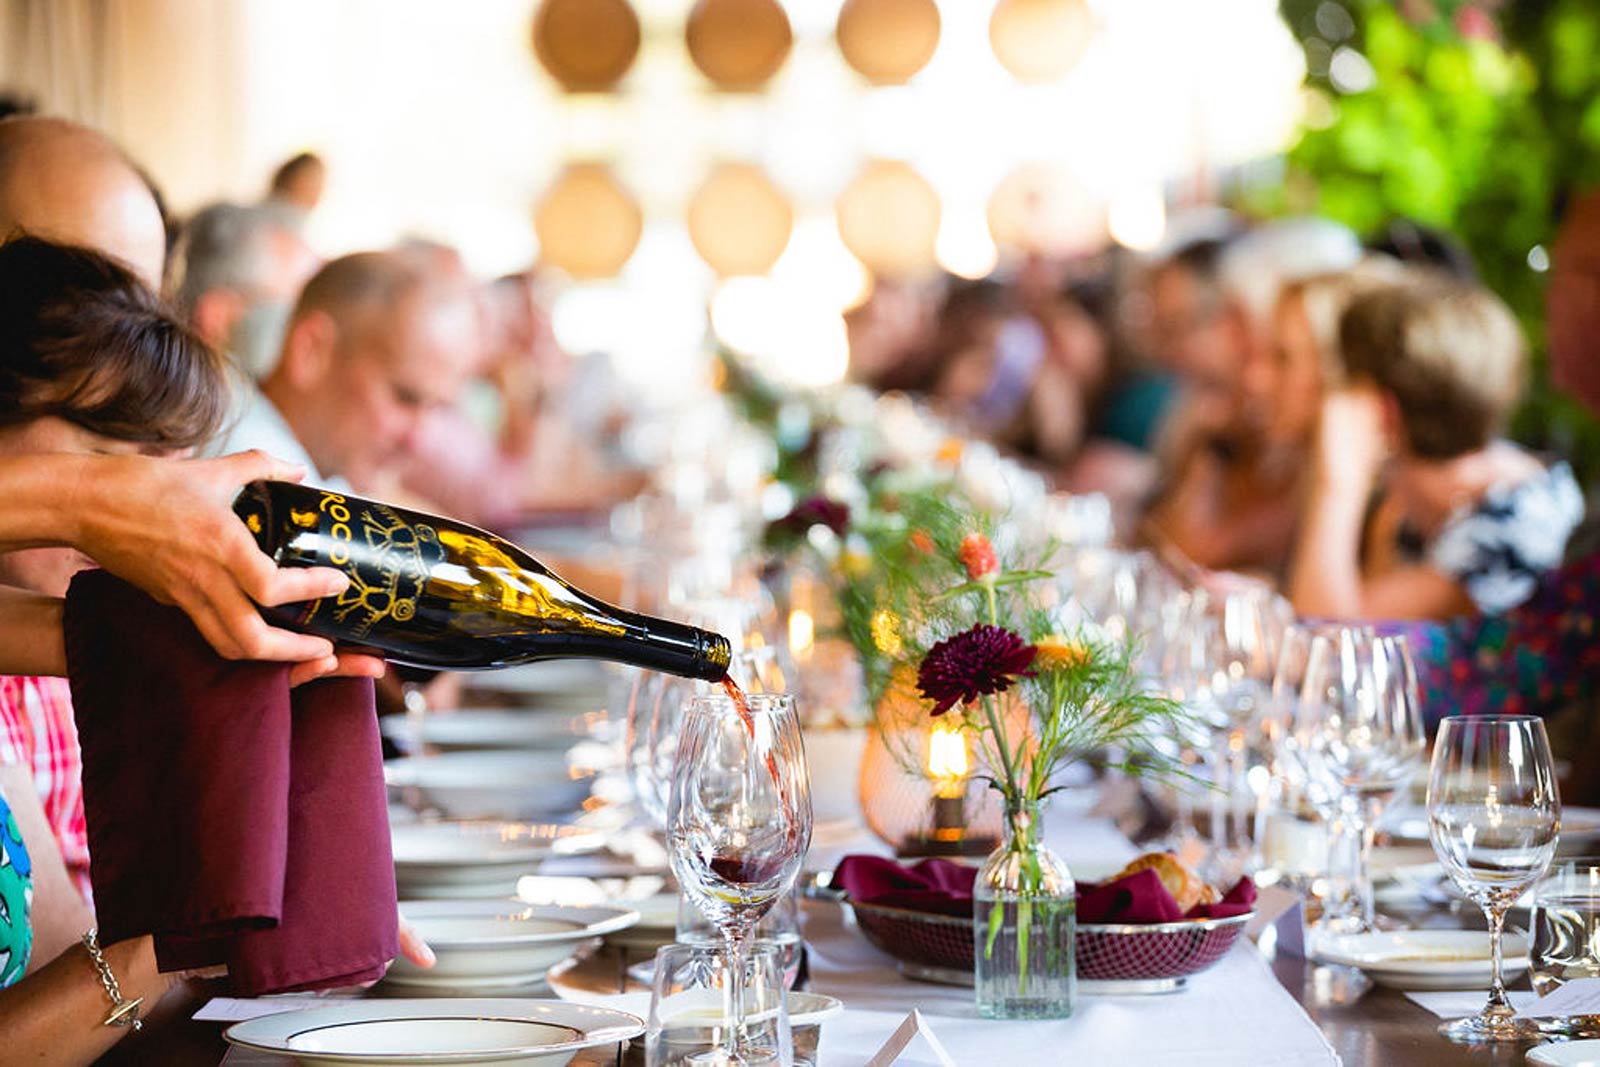 Wine being poured at a table.